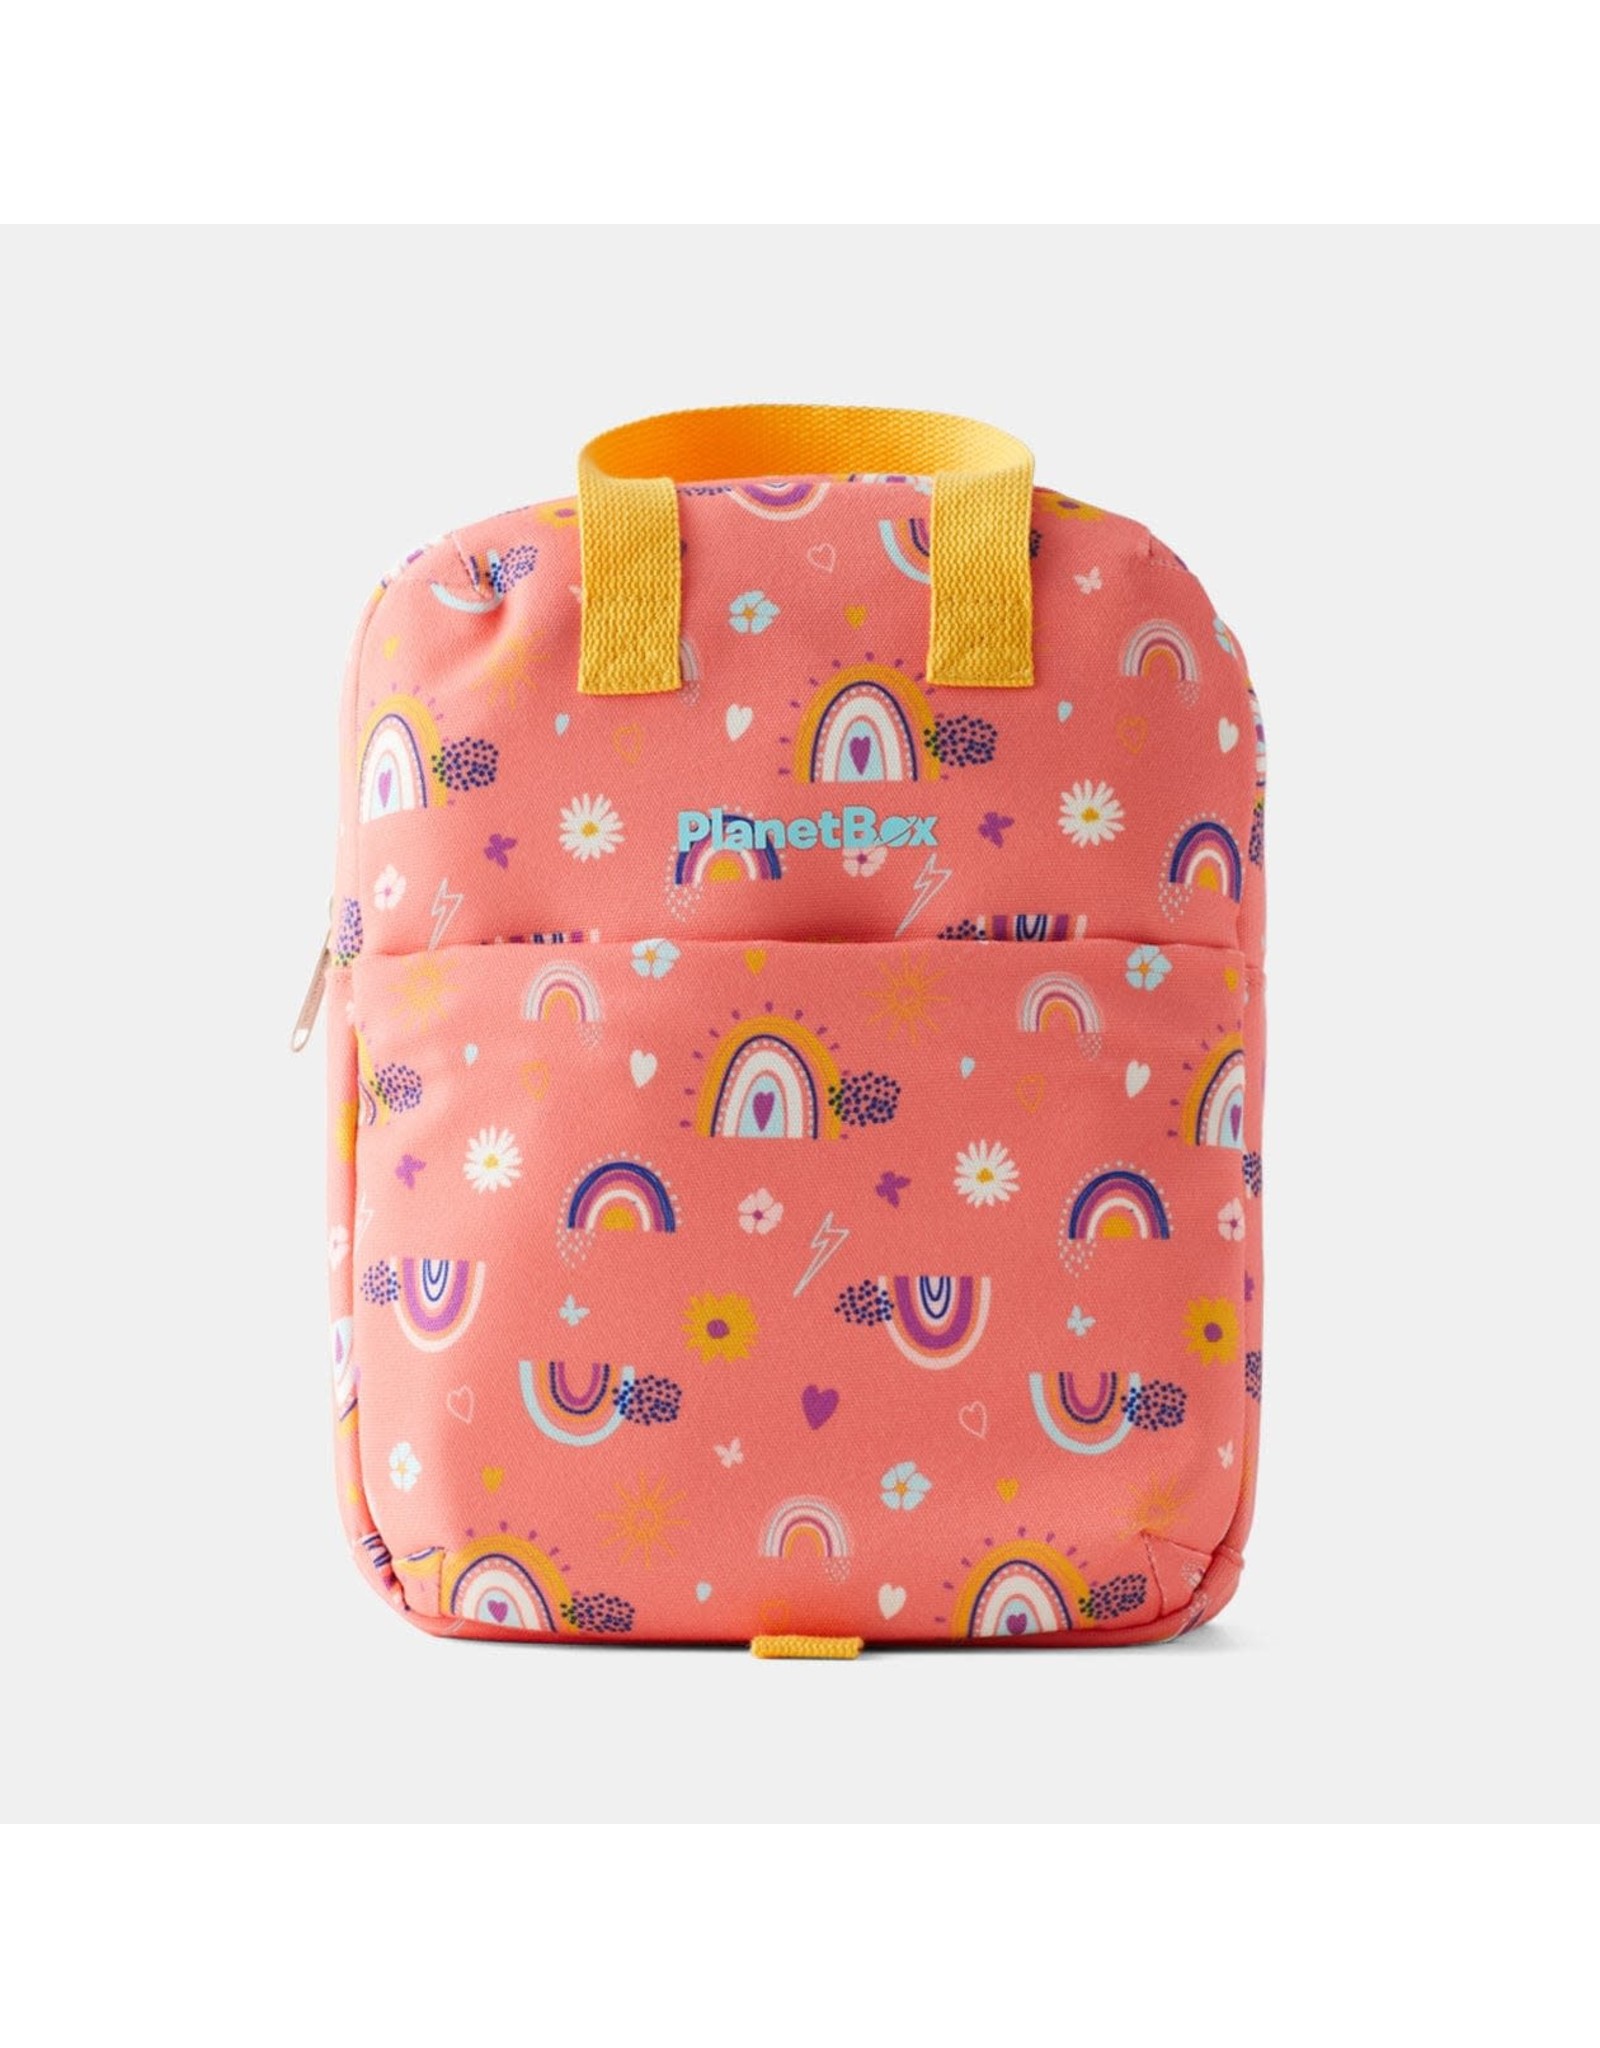 PlanetBox PlanetBox Lunch Tote Bag, Peach Rainbow